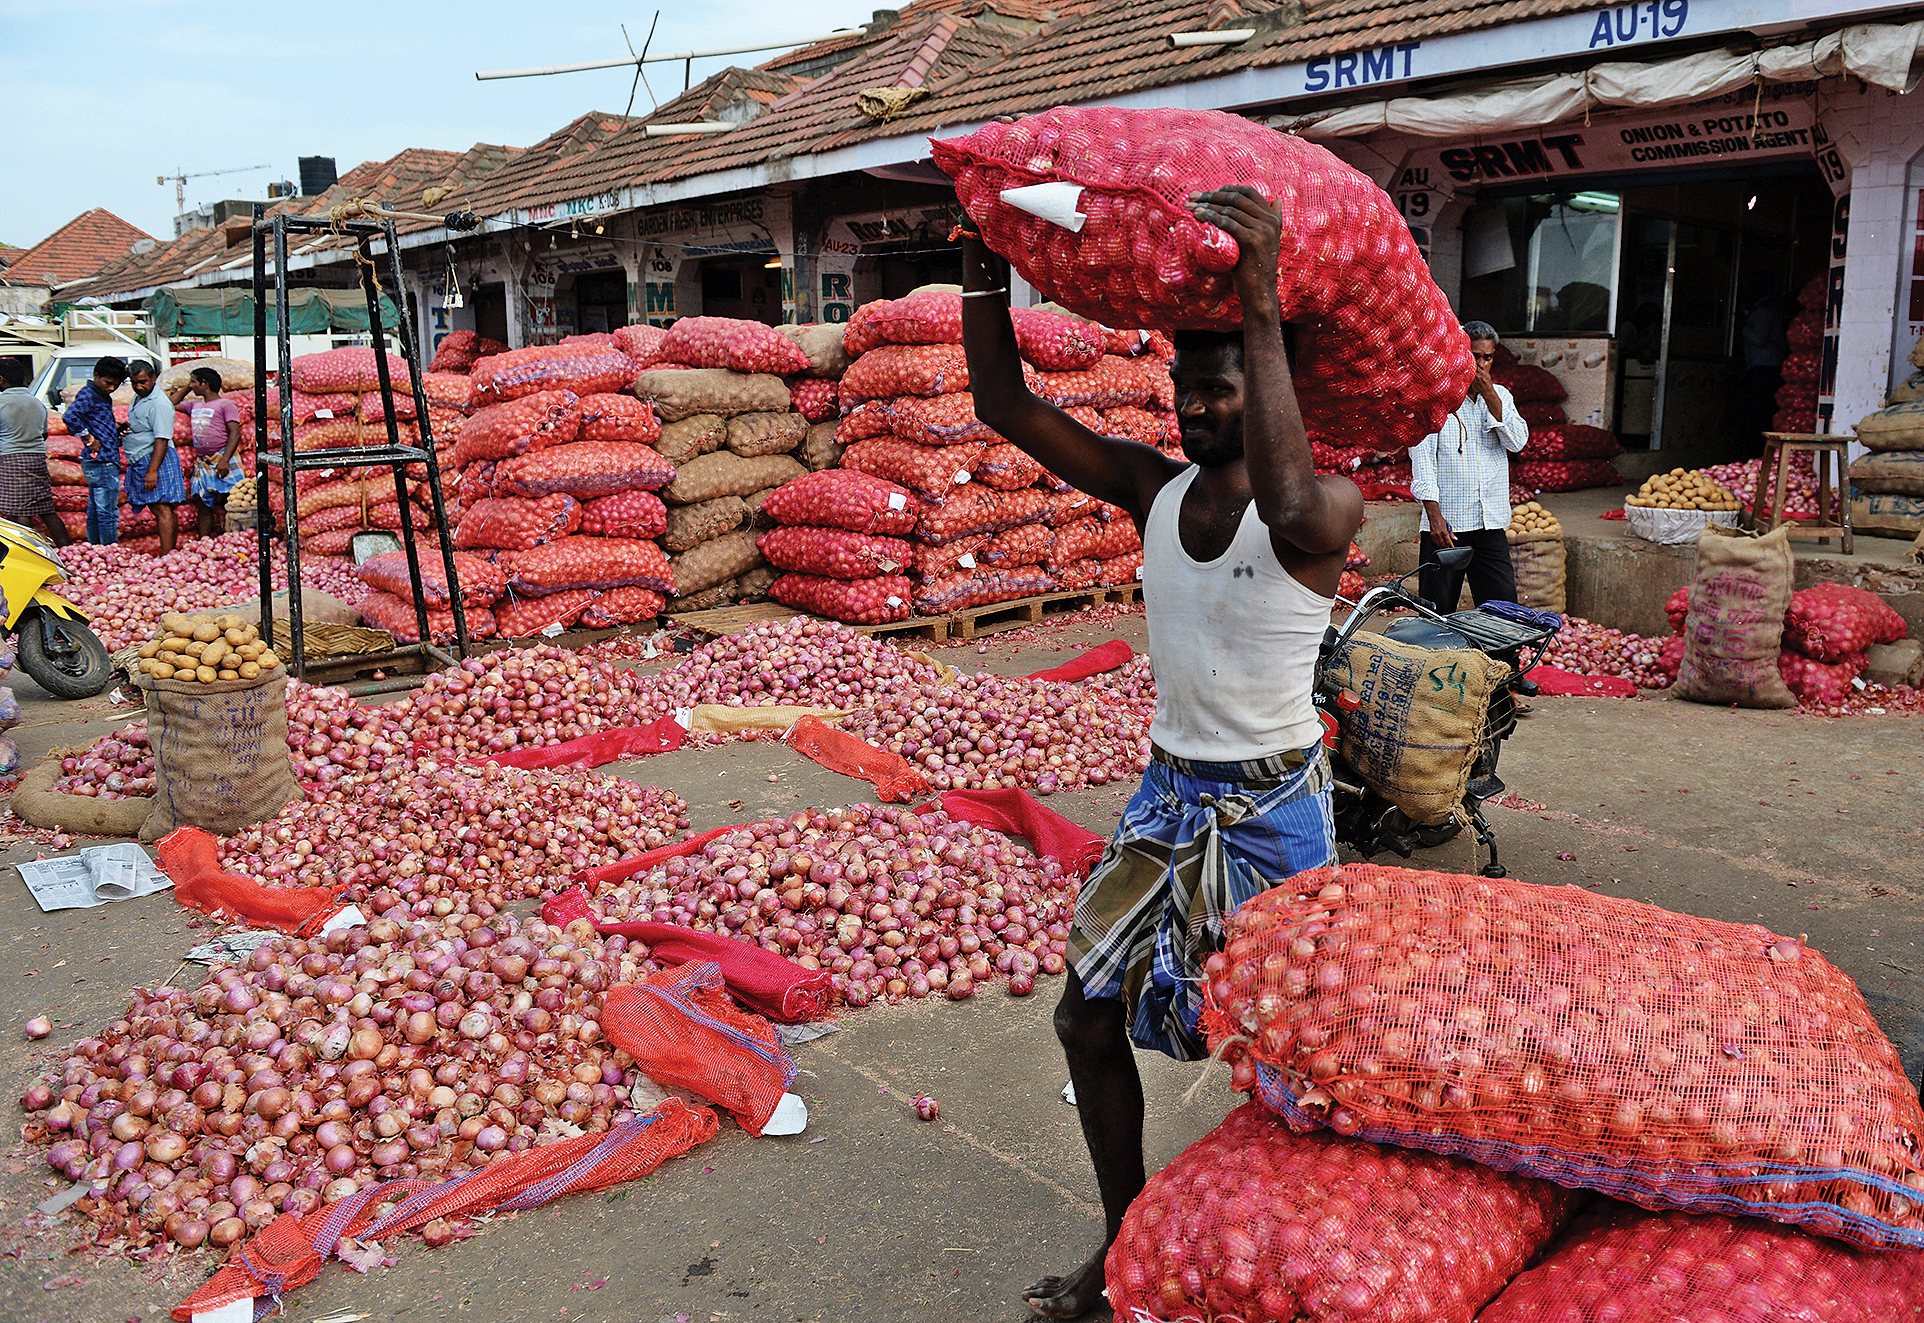 Delhiites can buy onions at Rs 25 per kg from NCCF vans tomorrow onwards